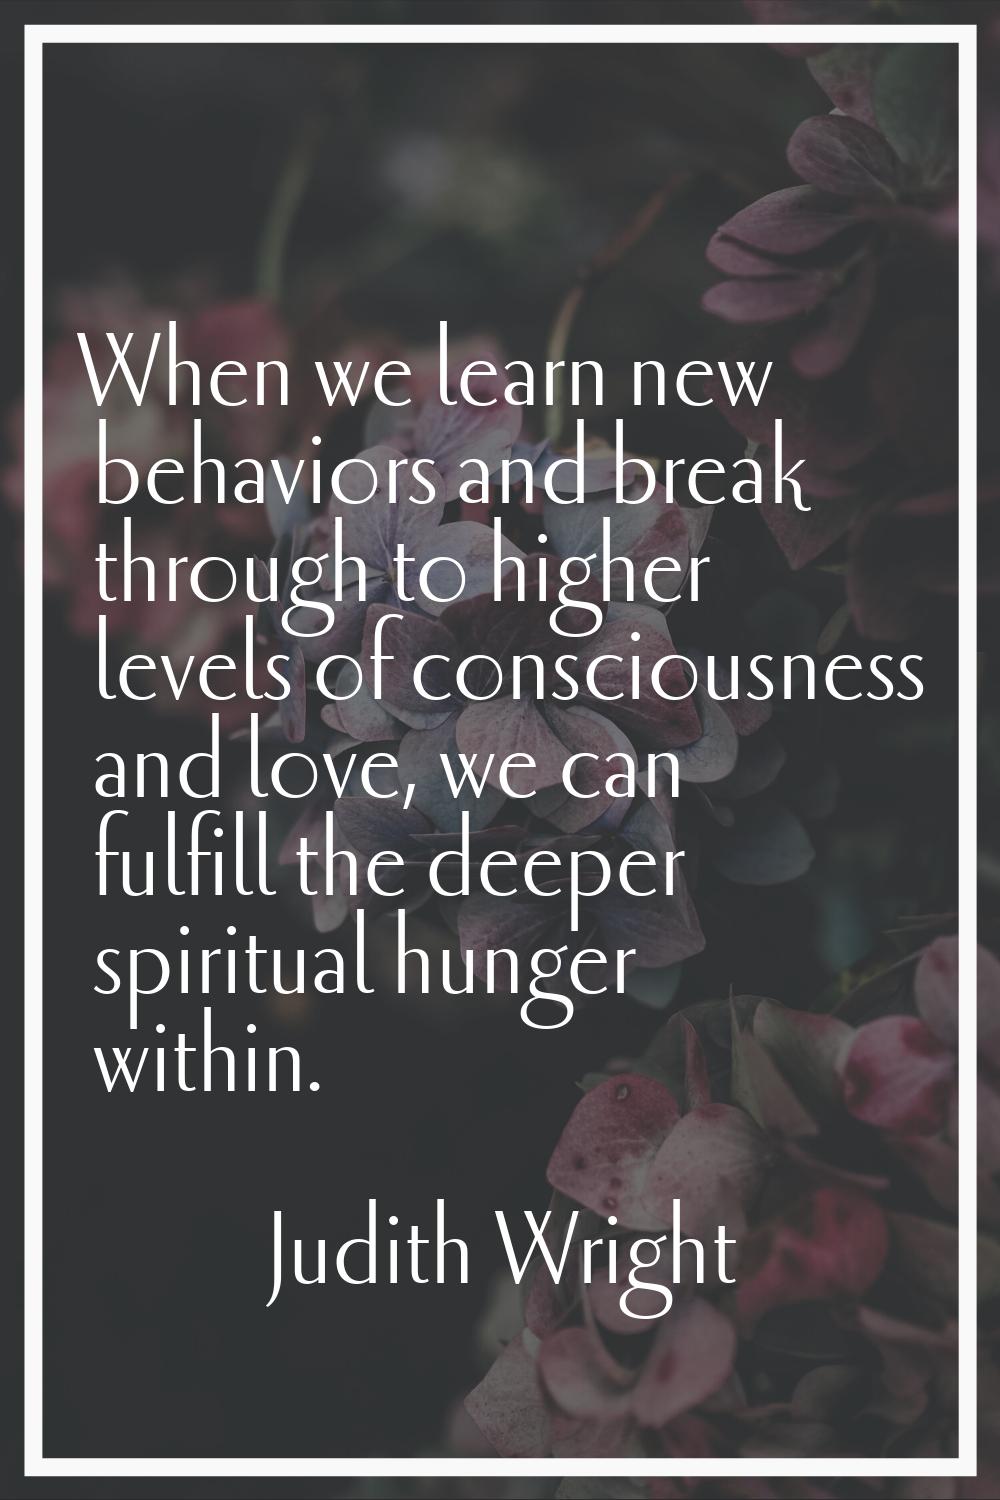 When we learn new behaviors and break through to higher levels of consciousness and love, we can fu